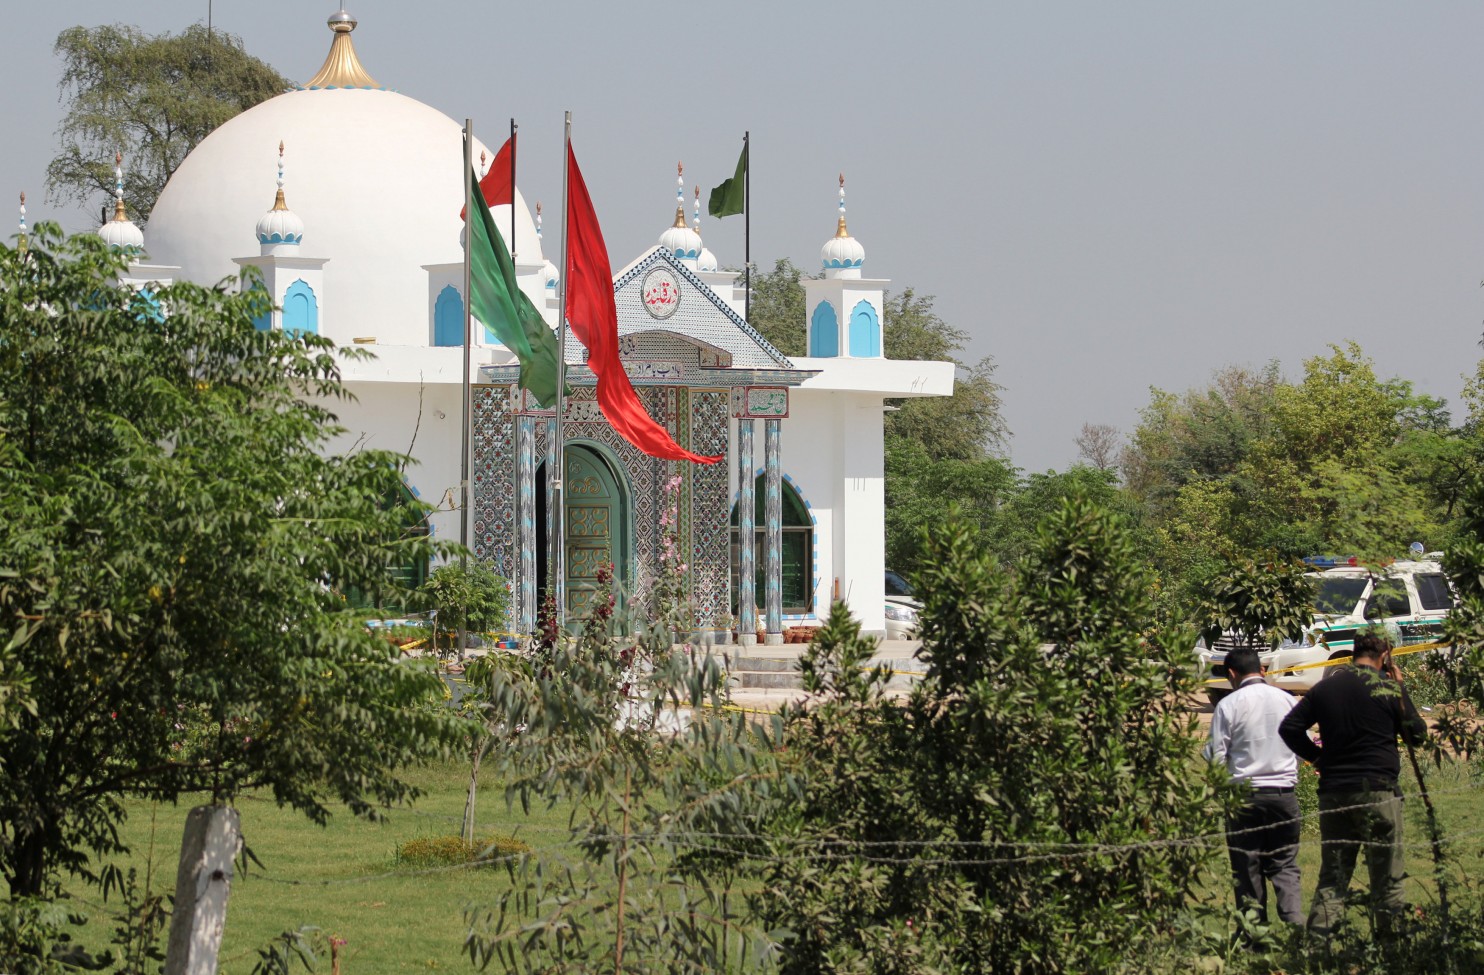  Custodian of Sufi shrine in Pakistan is arrested in killings of at least 20 worshipers